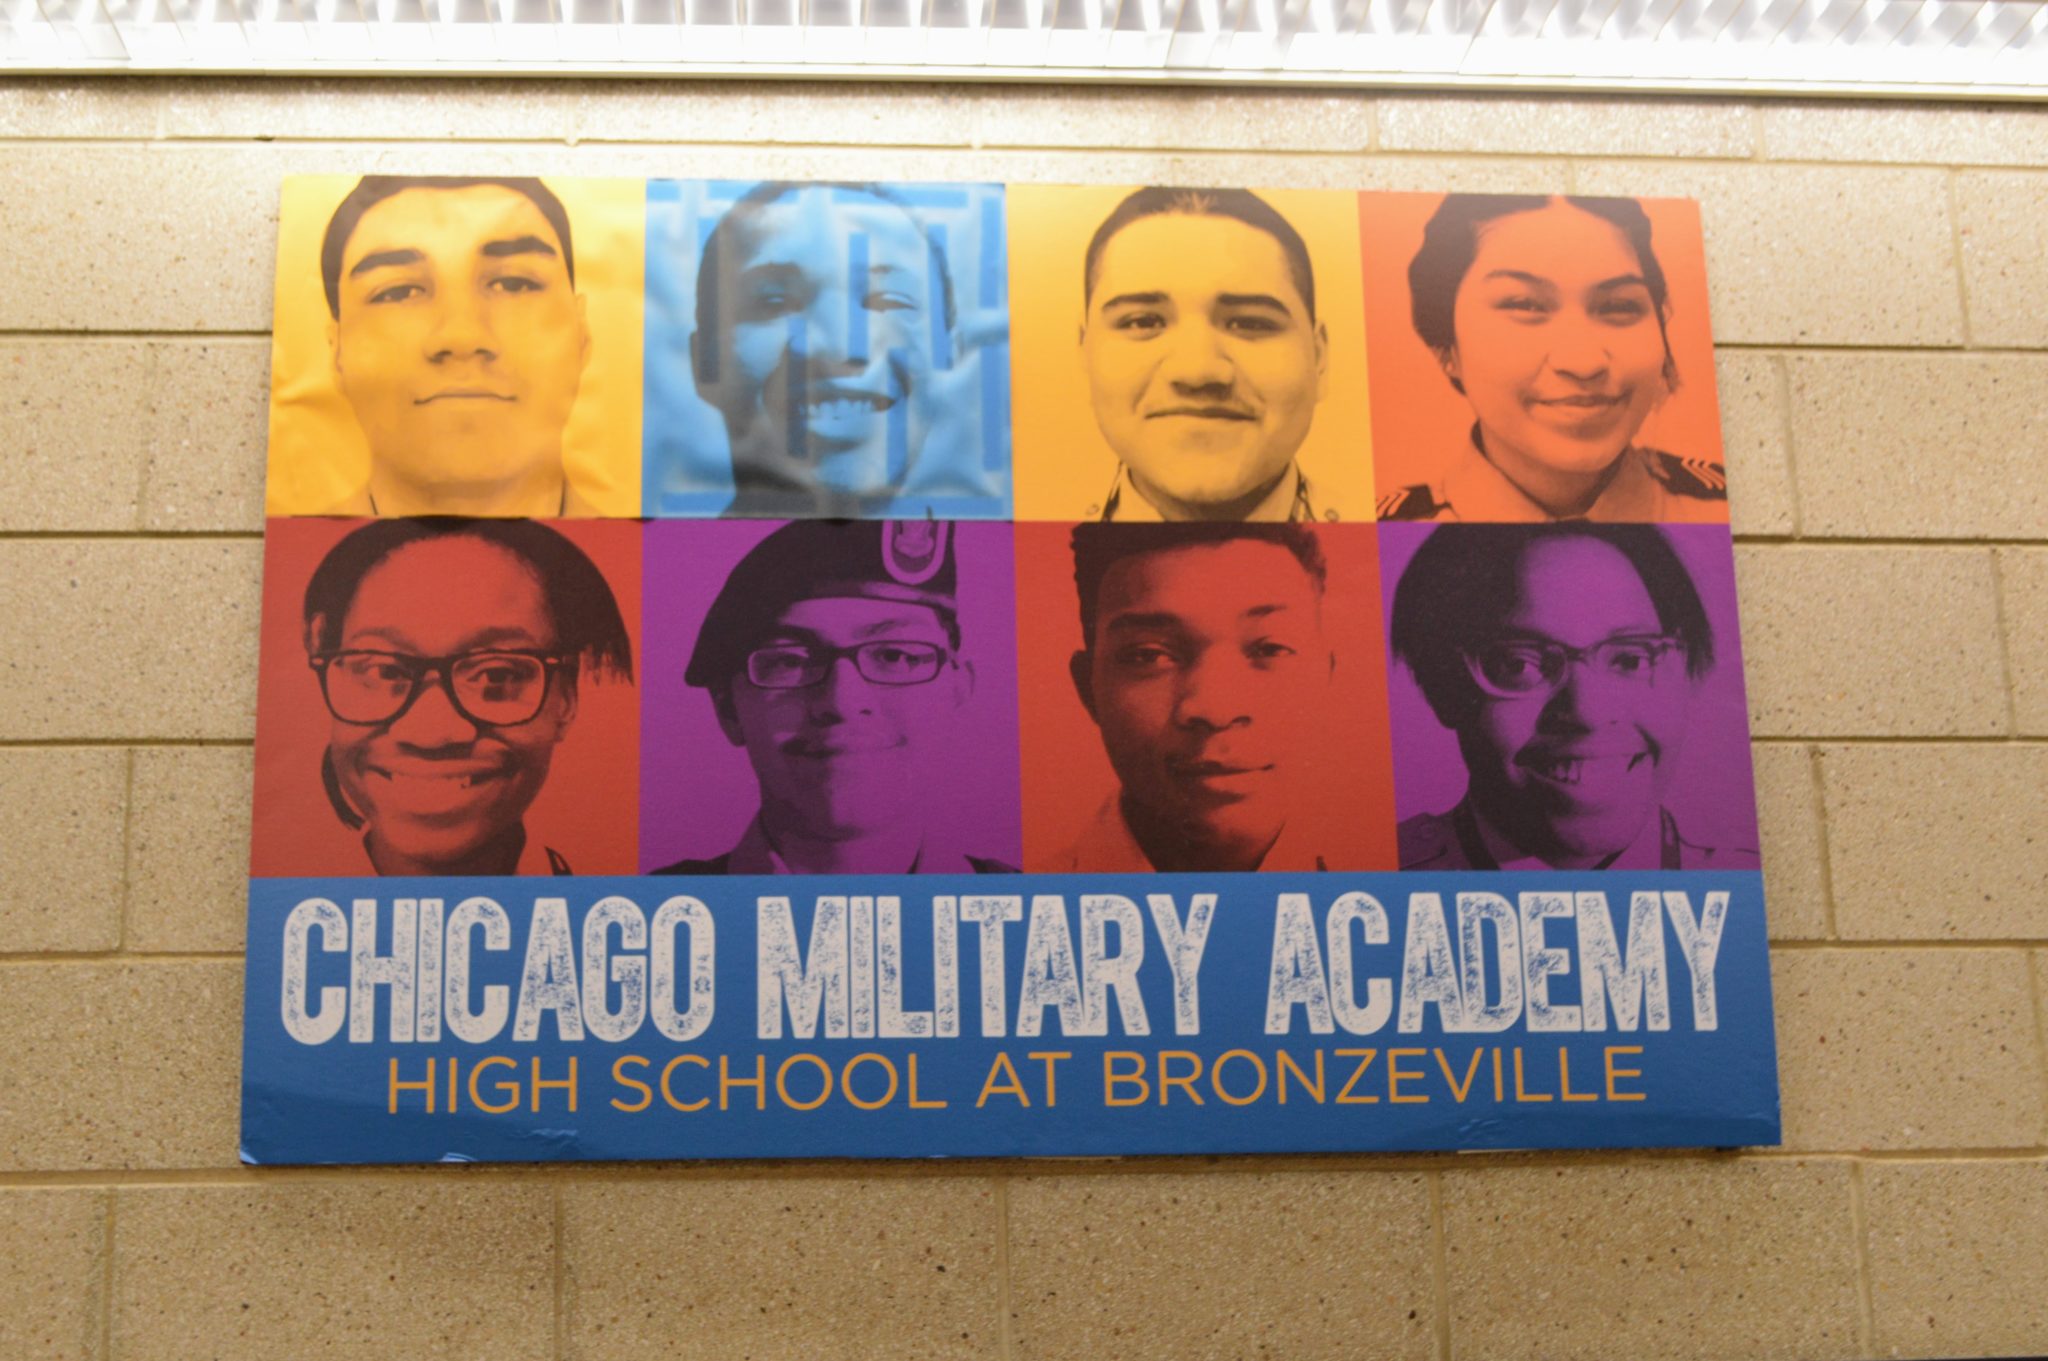 Chicago Military Academy High School at Bronzeville poster